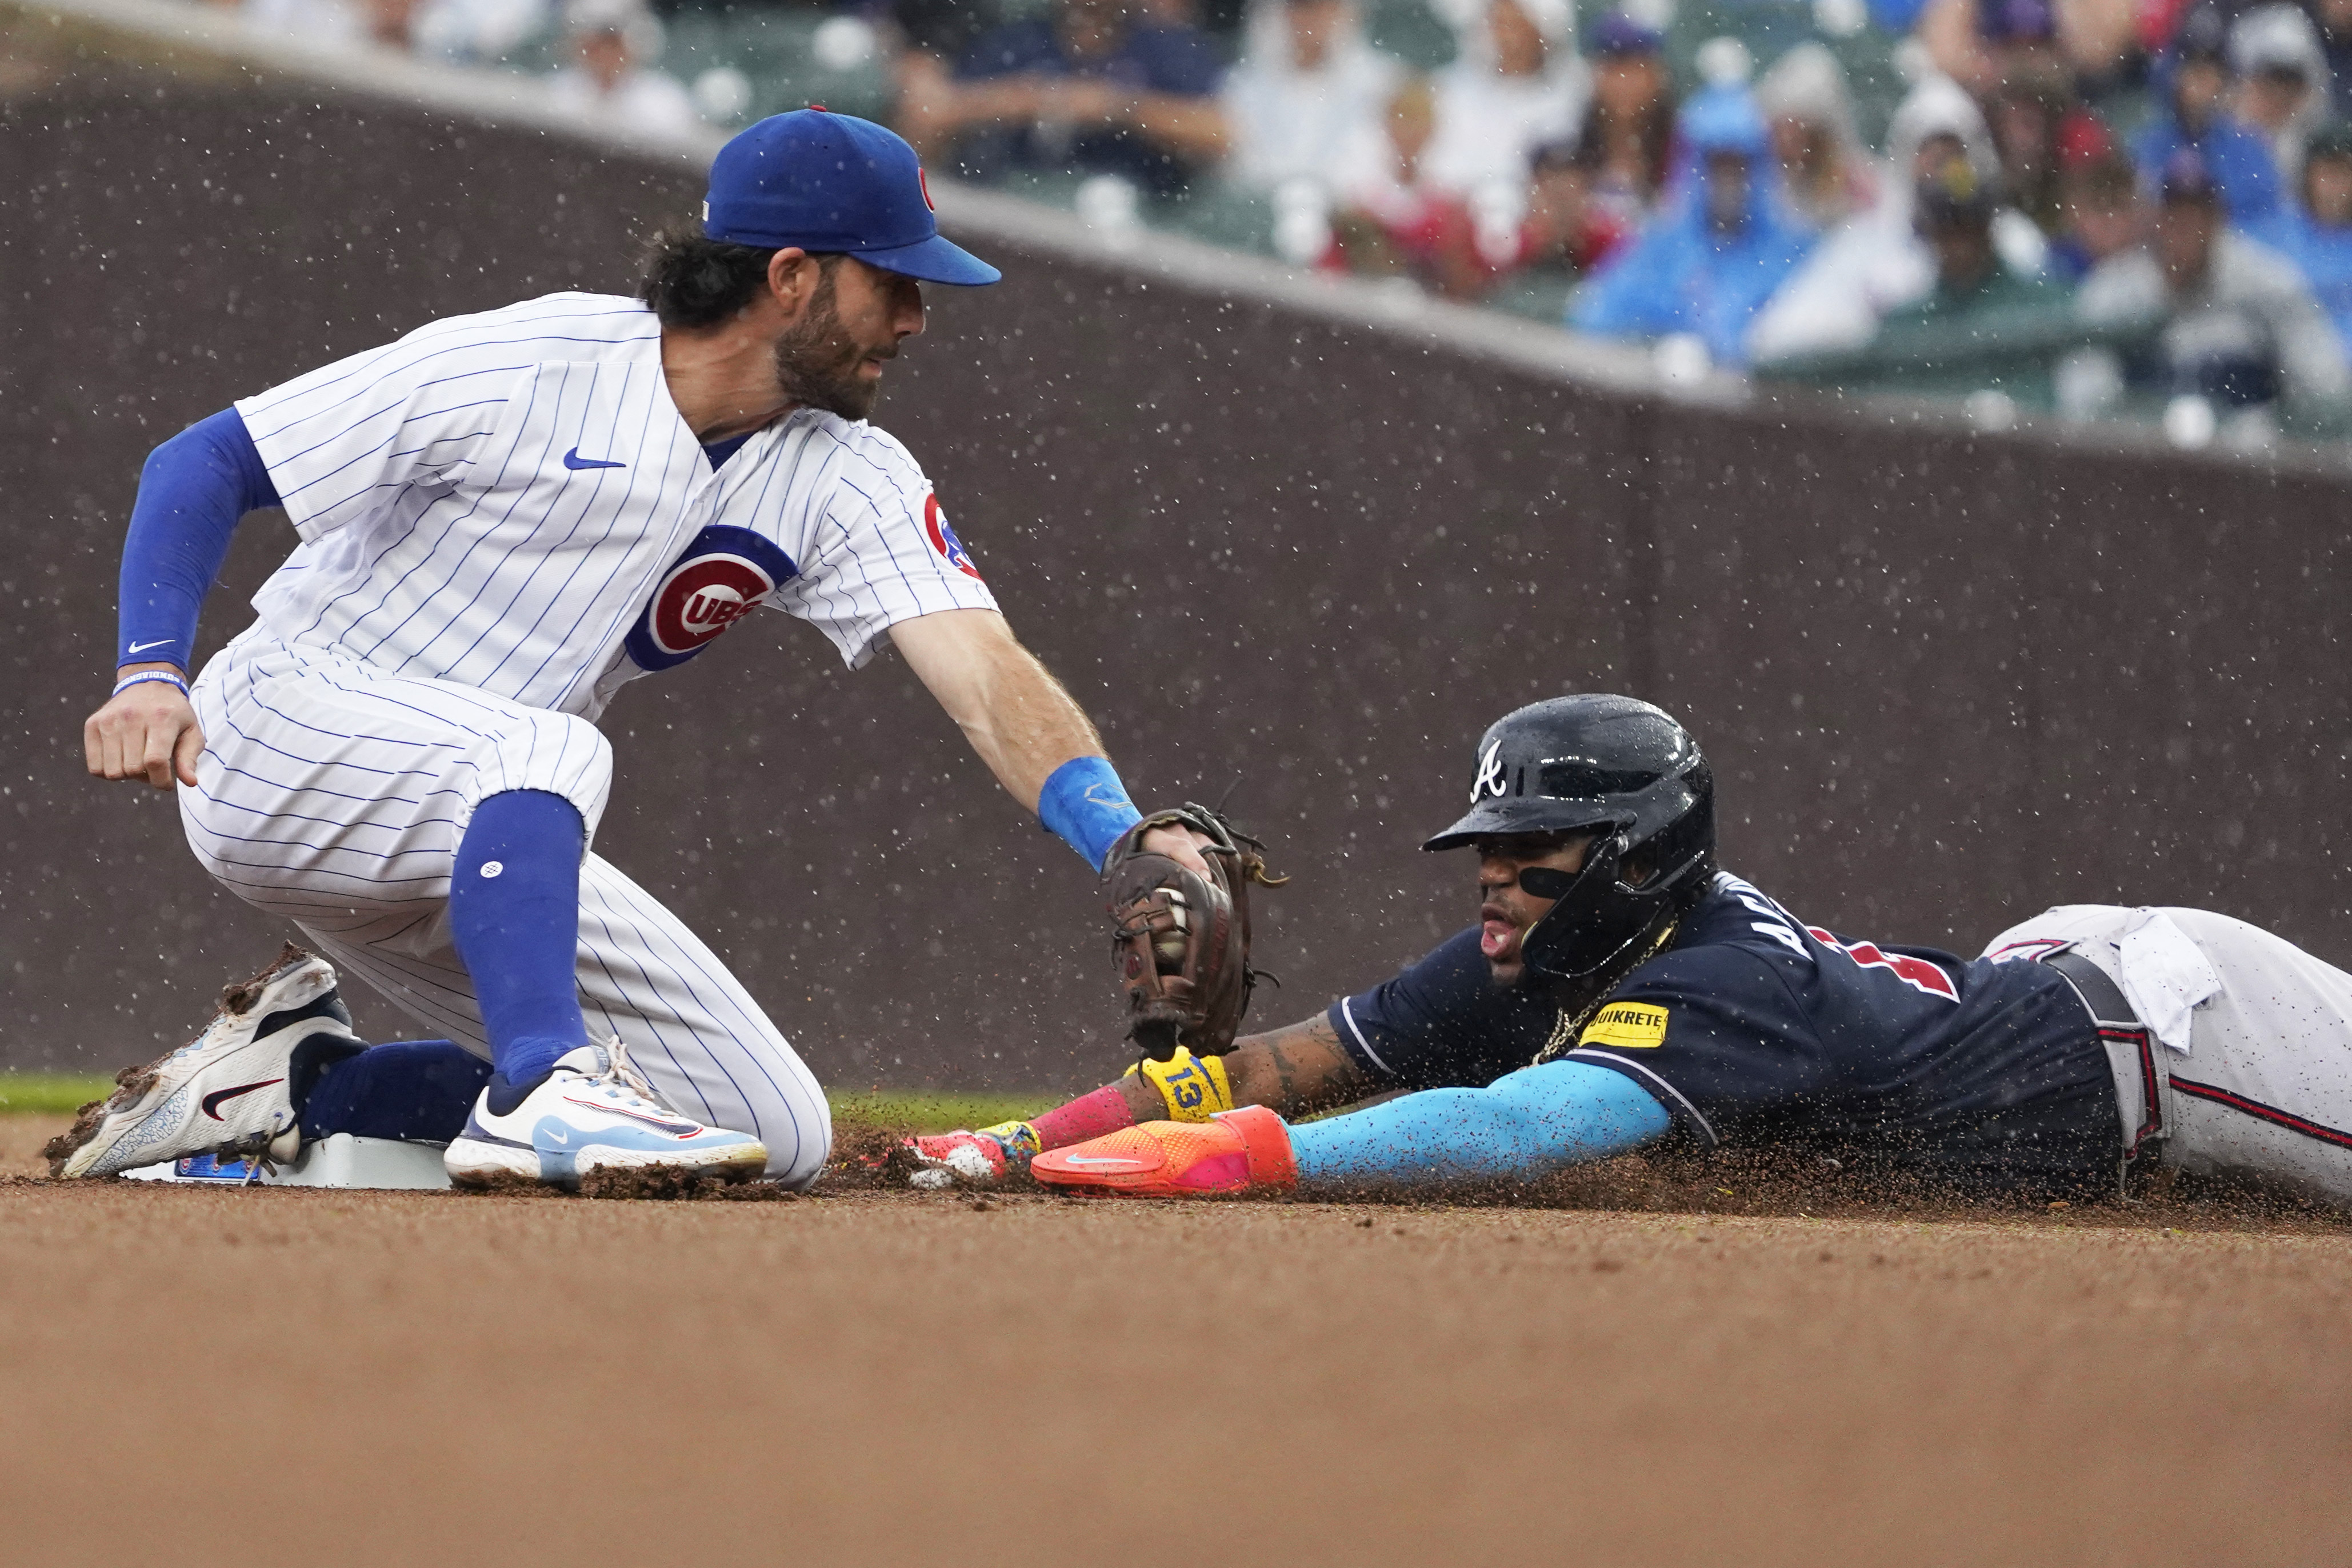 Swanson and Candelario go deep as the Cubs hold off the Braves 8-6 at rainy  Wrigley - ABC News